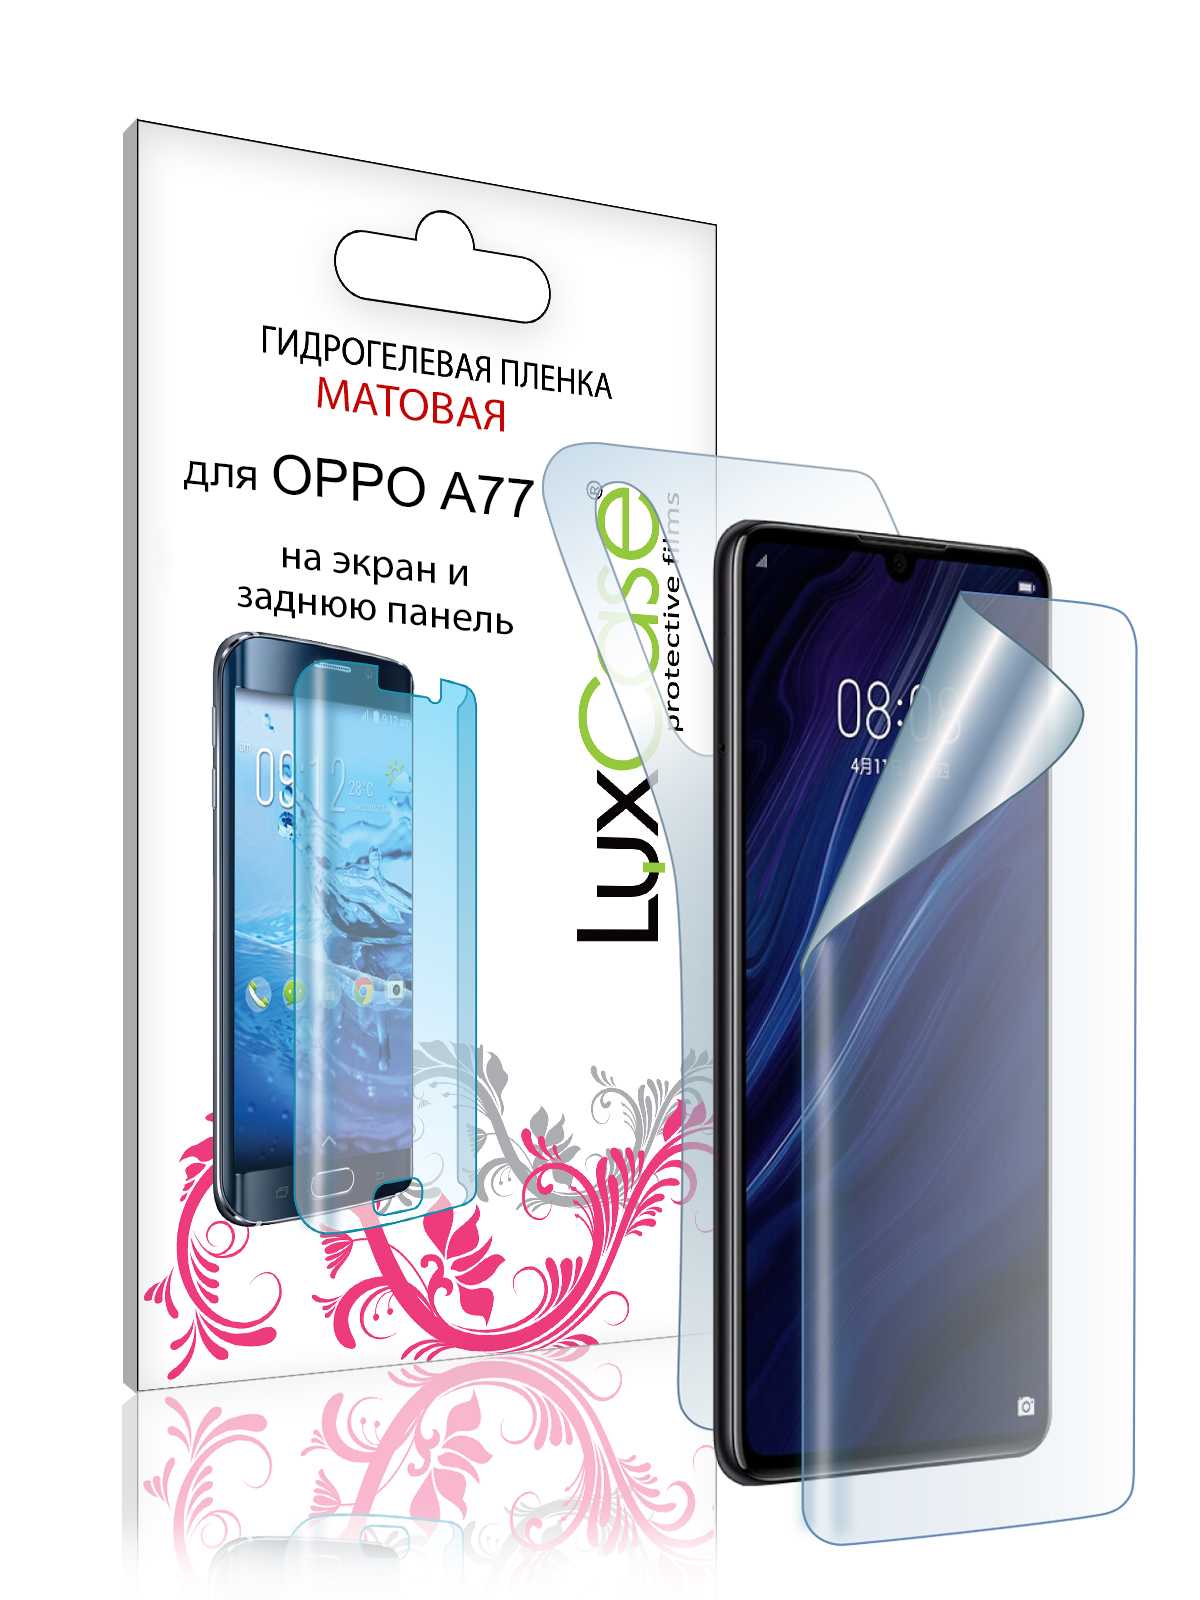 Гидрогелевая пленка LuxCase для Oppo A77 0.14mm Matte Front and Back 87650 гидрогелевая пленка luxcase для oppo a77 0 14mm matte front and back 87650